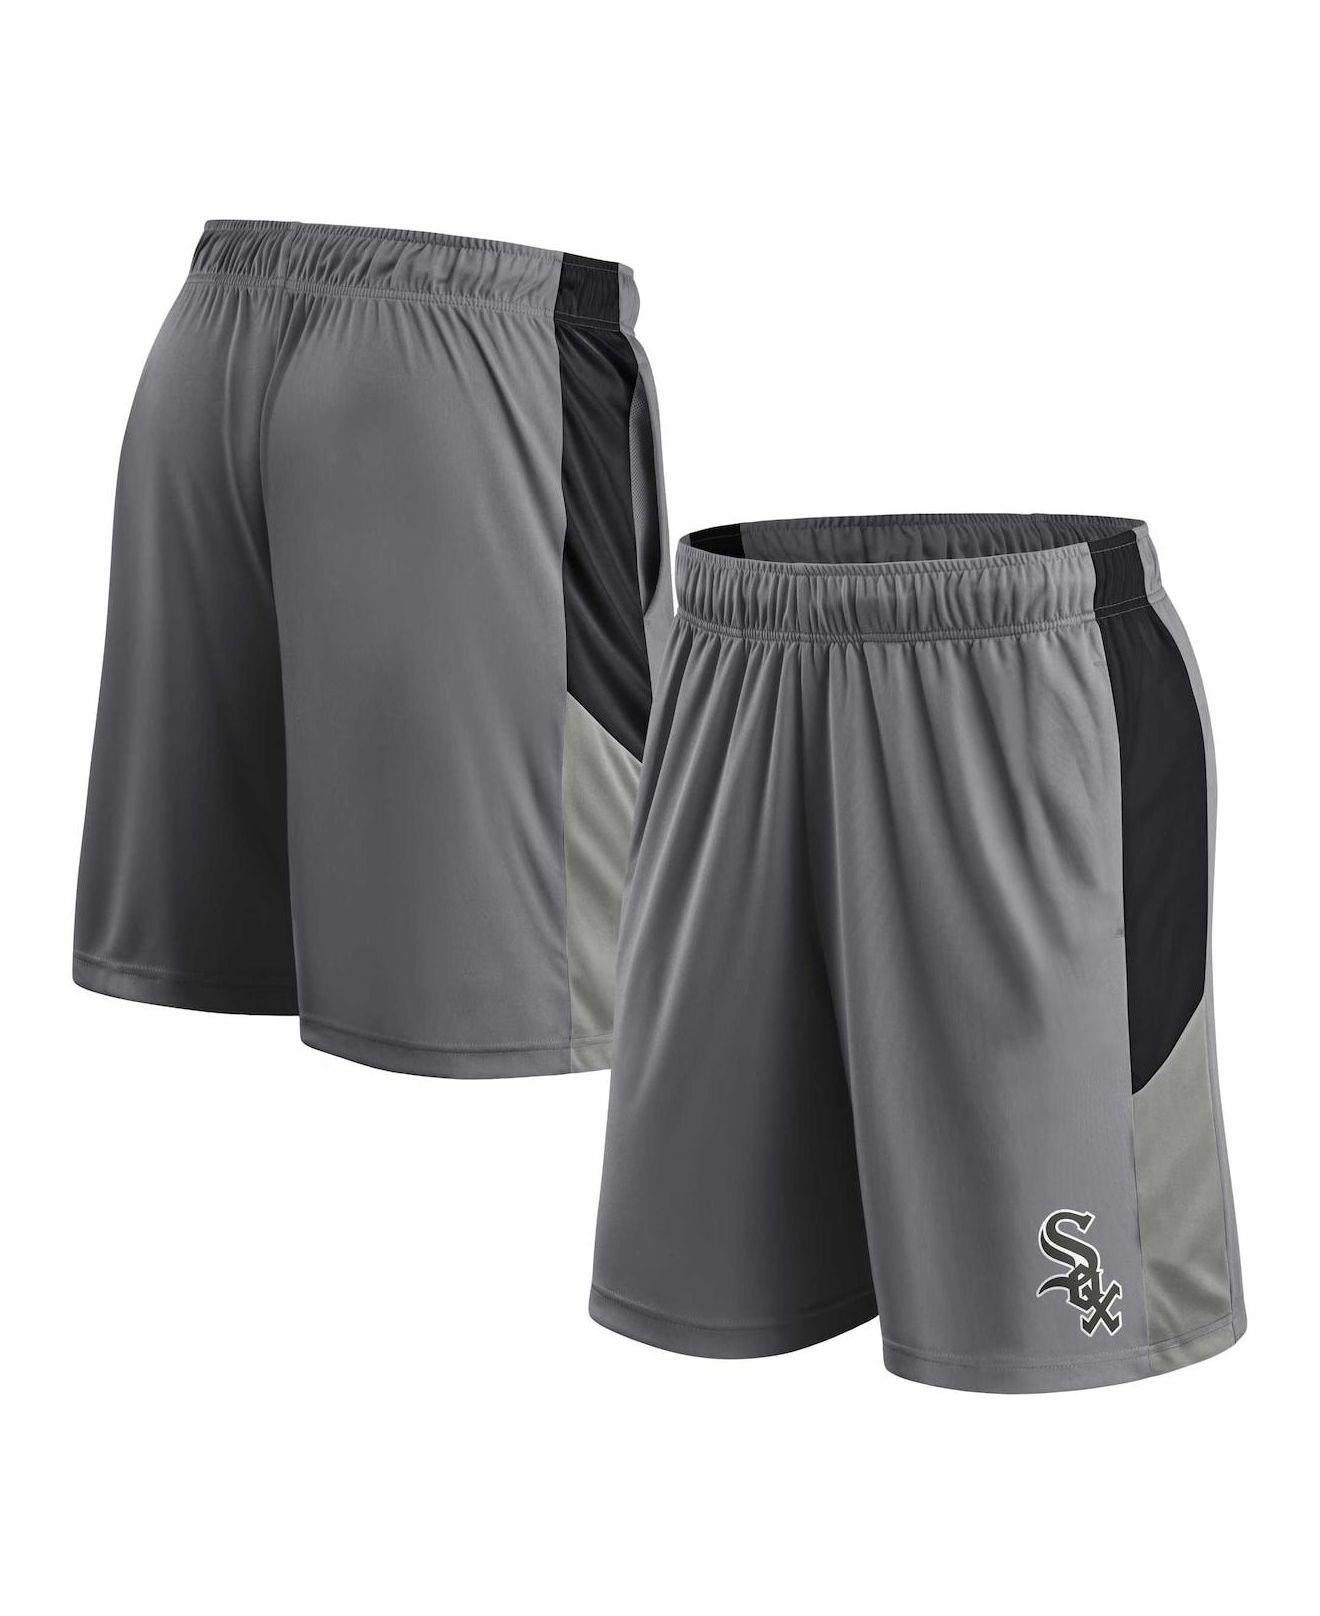 Profile Gray, Black Chicago White Sox Big And Tall Team Shorts for